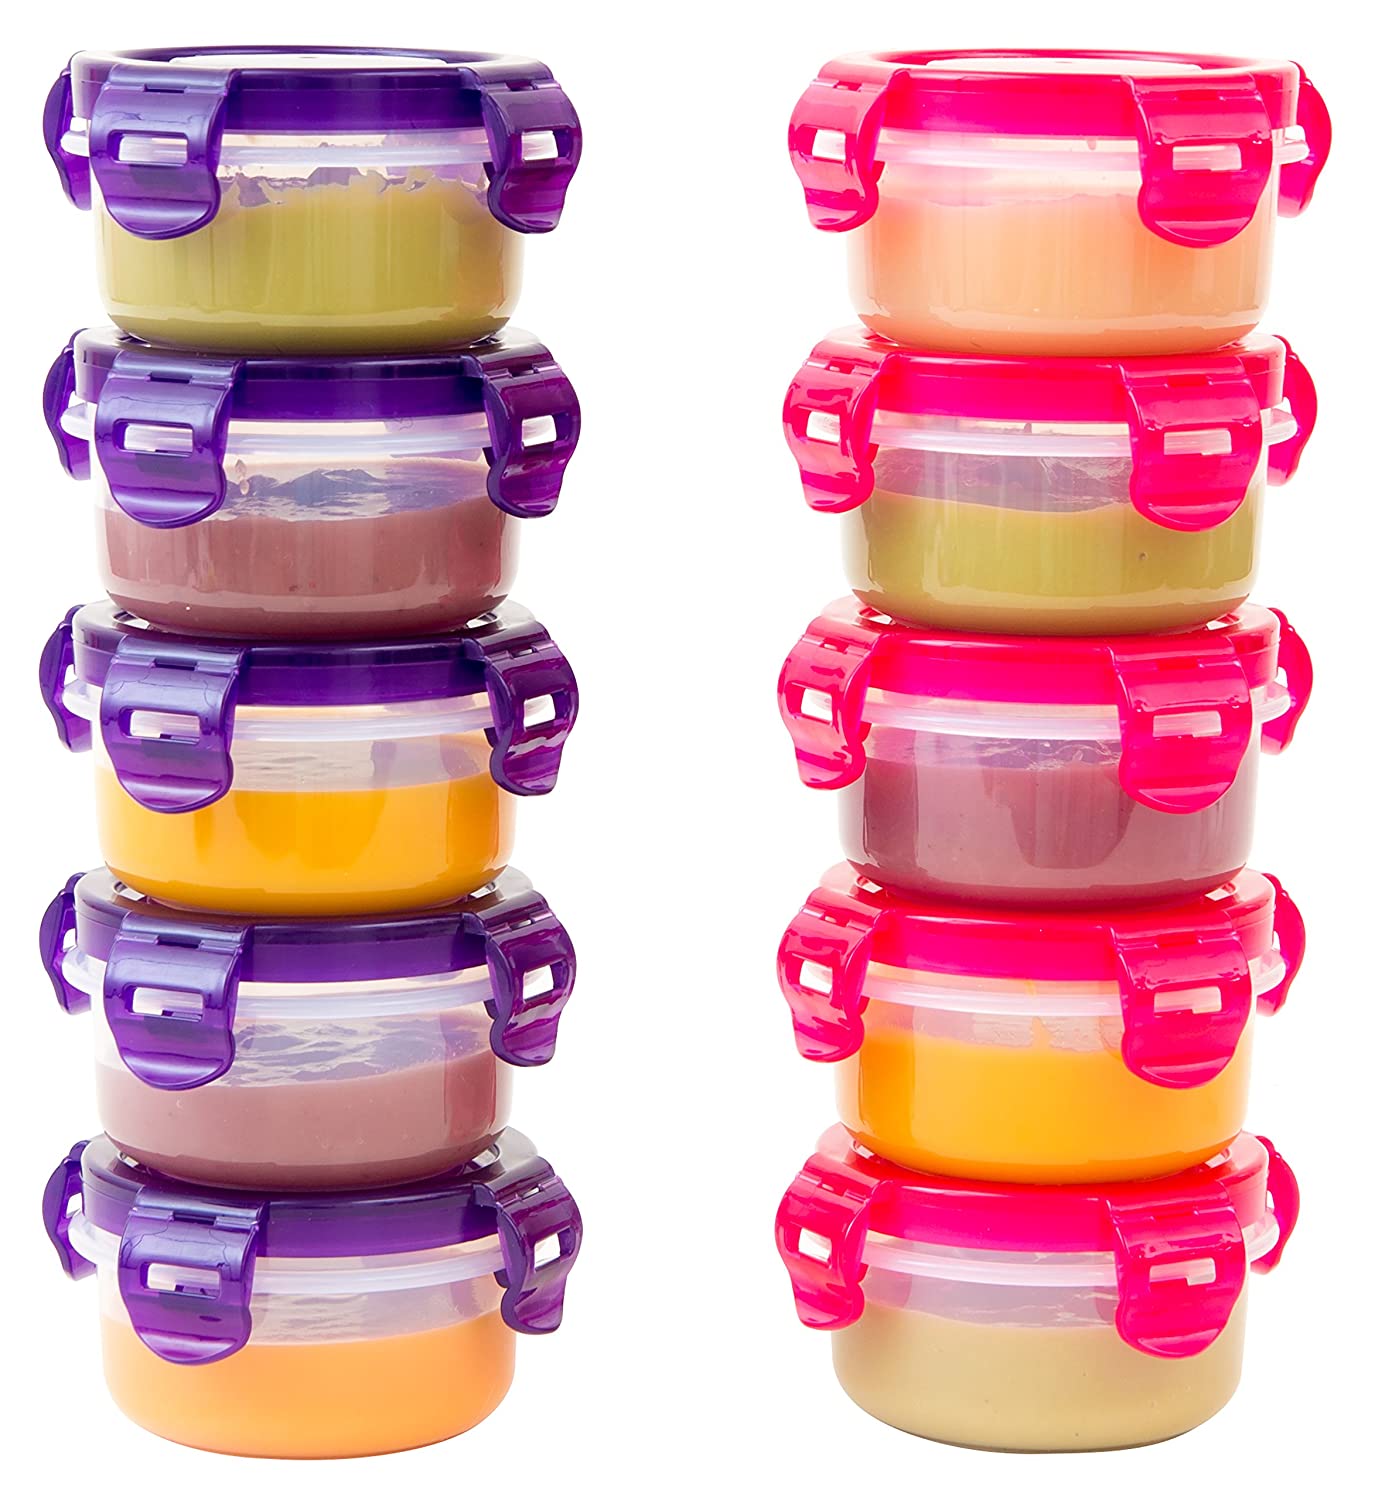 Elacra Baby Food Storage Freezer Containers [10-Pack, 3.4 oz] BPA-Free Airtight Small Containers with Lids, Airtight, Pink and Purple